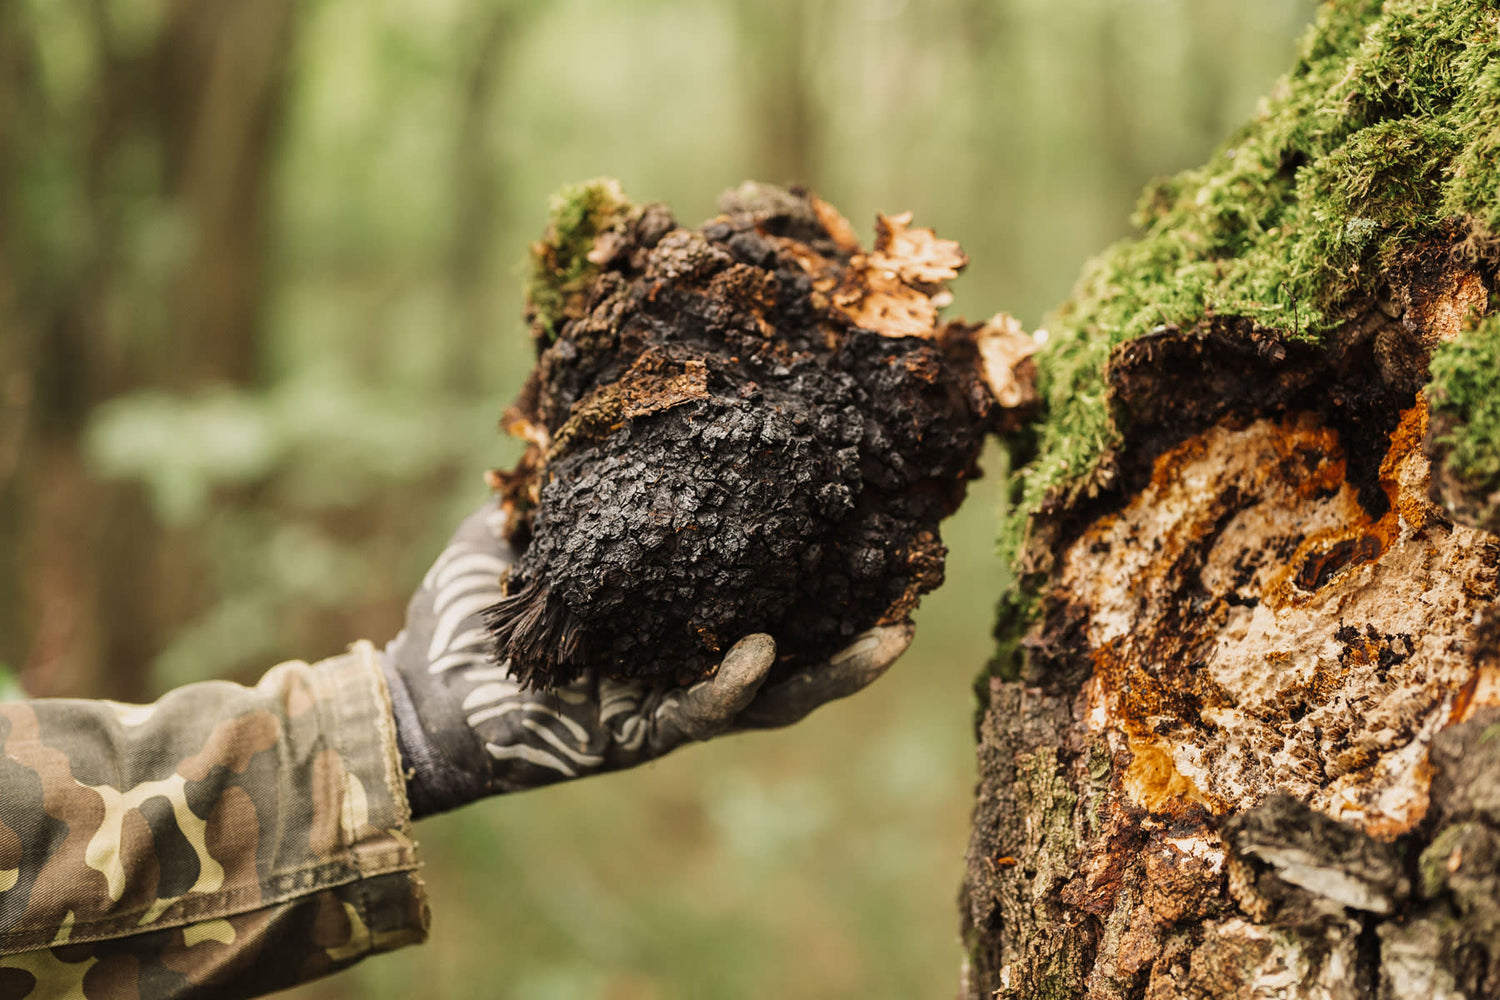 Person in camouflage clothing and gloves harvesting a chaga mushroom from a moss-covered tree in a forest.